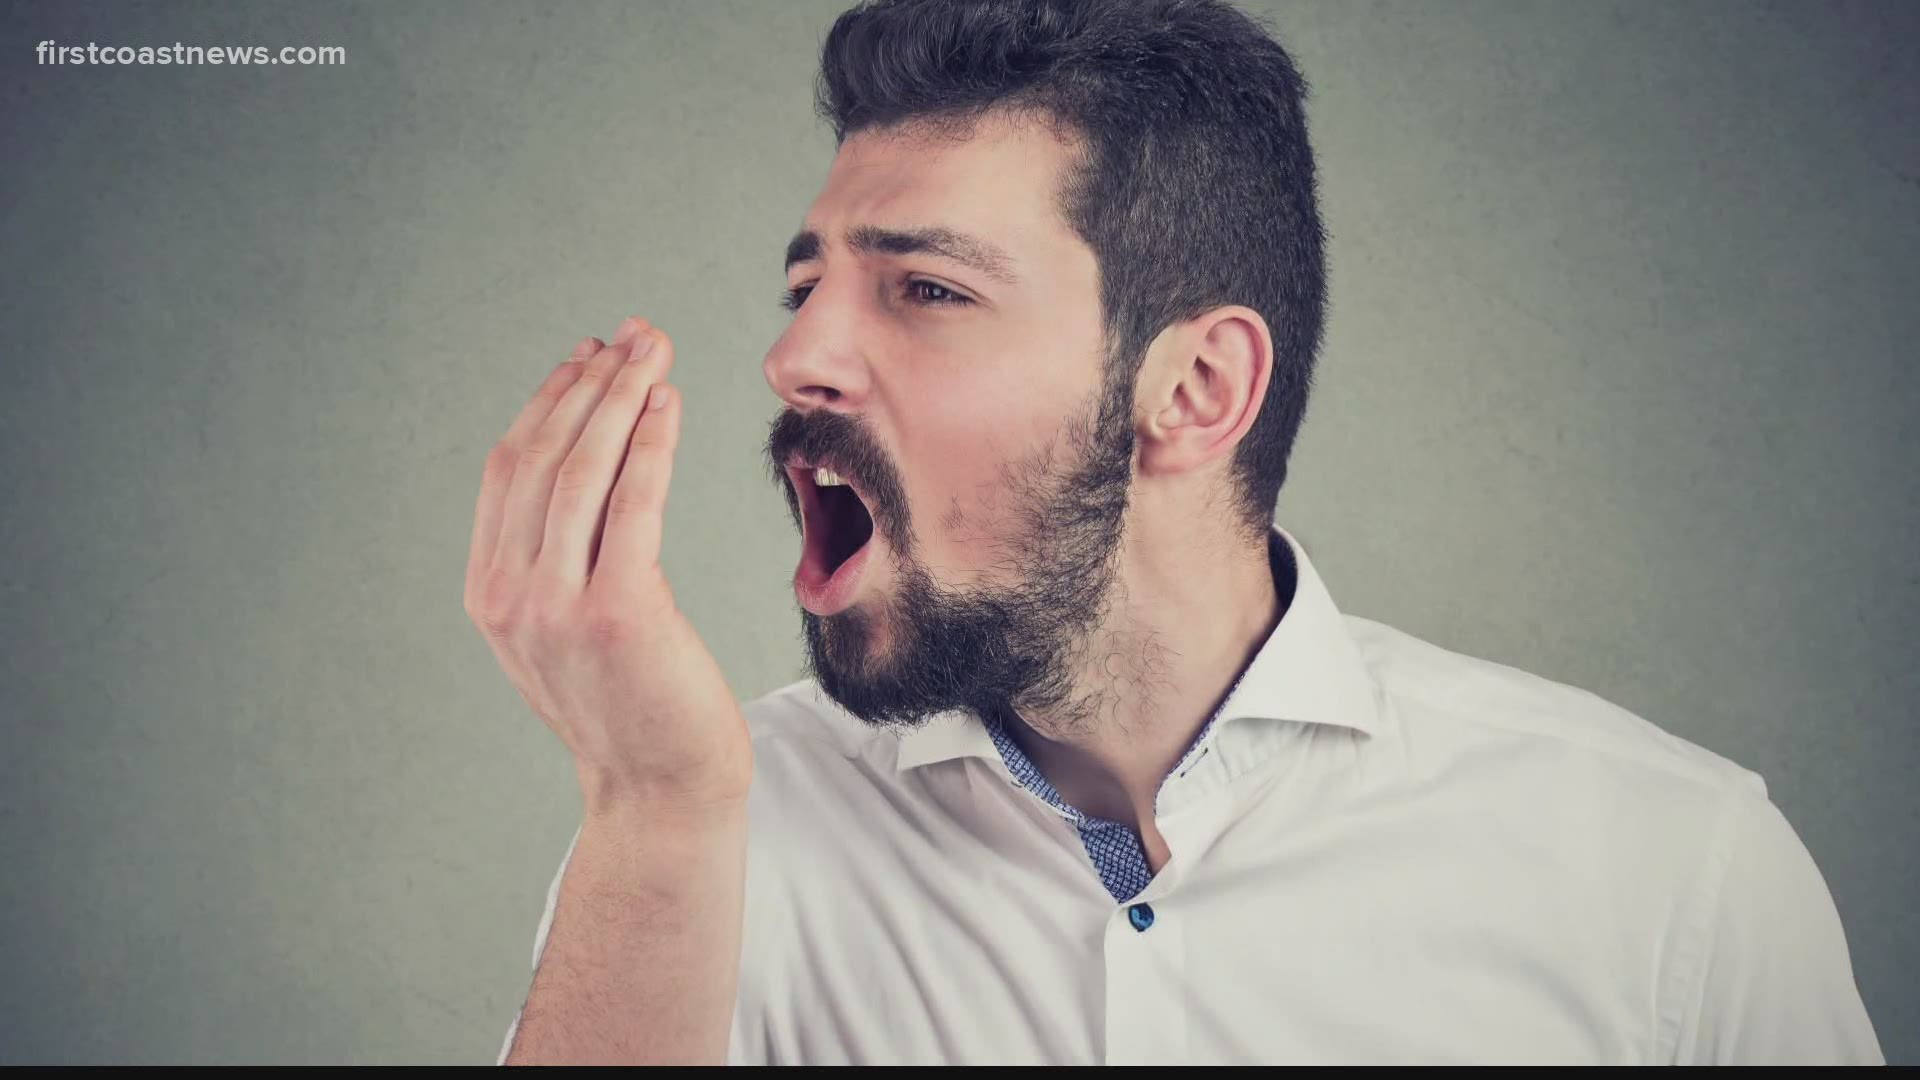 Dentists are now reporting more cases of bad breath, calling it "mask mouth" due to drier conditions in the mouth.